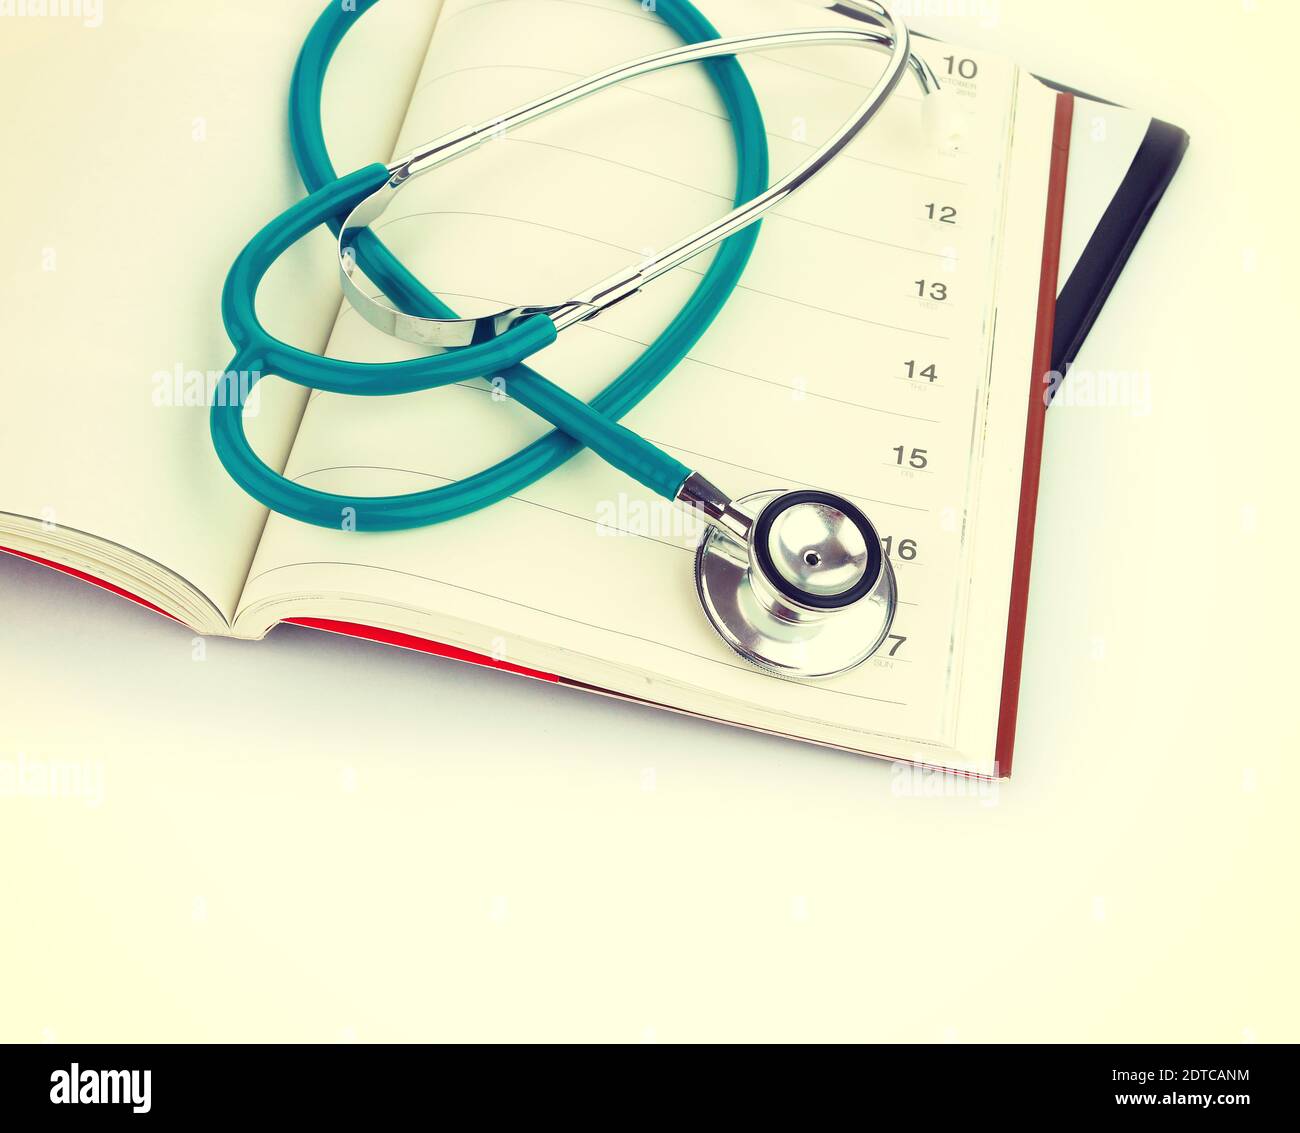 High Angle View Of Stethoscope With Diaries Against White Background Stock Photo